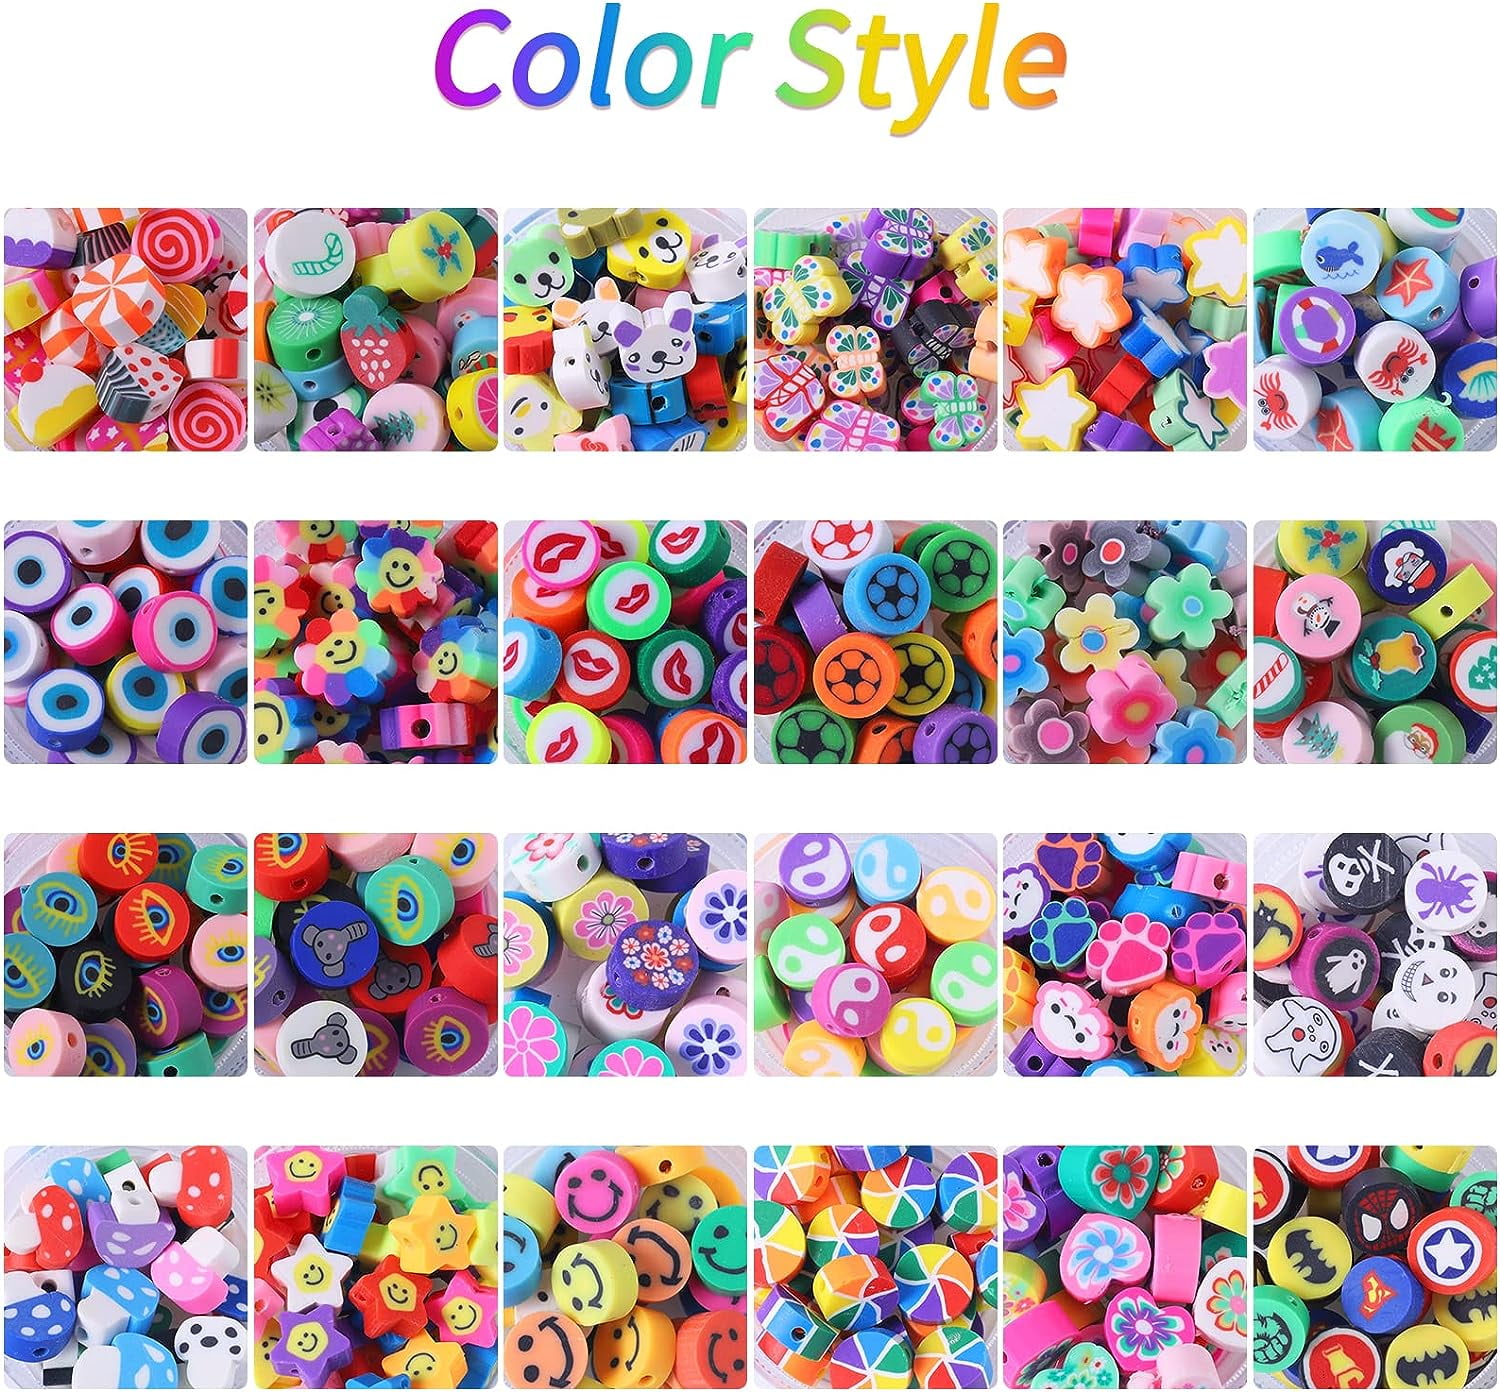  Thrilez 360 Pcs Fruit Flower Polymer Clay Beads for